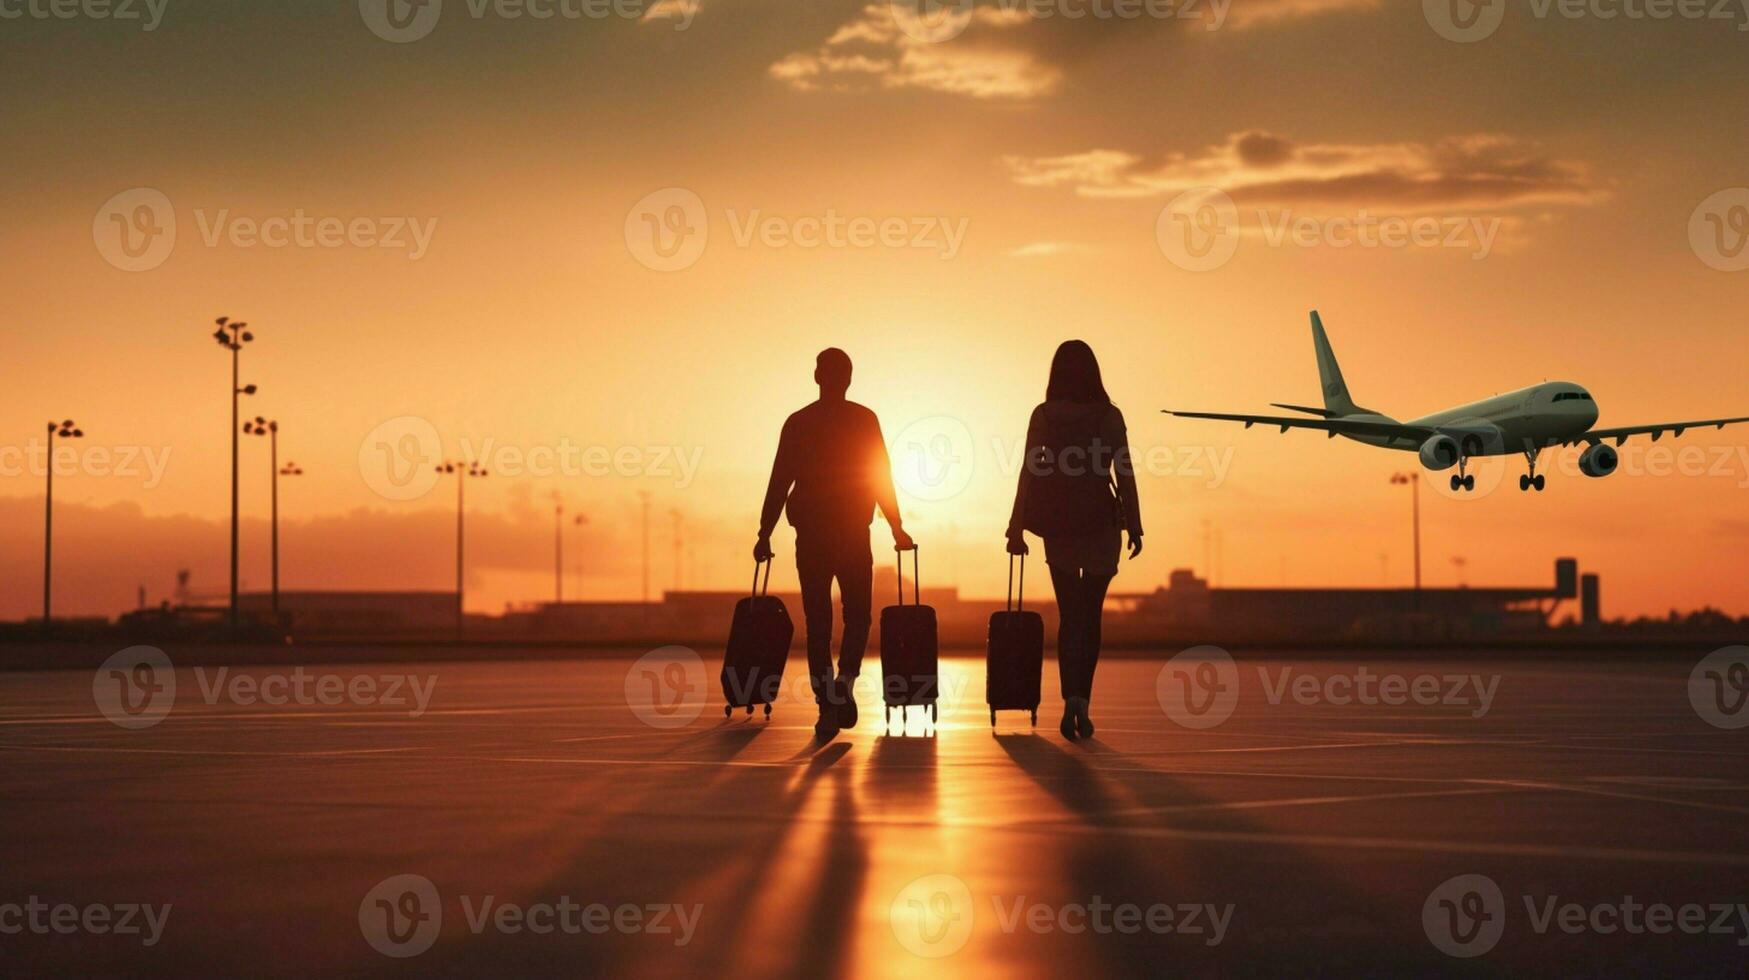 A couple is walking on the runway with suitcases, presumably heading to the airport to catch a flight. photo